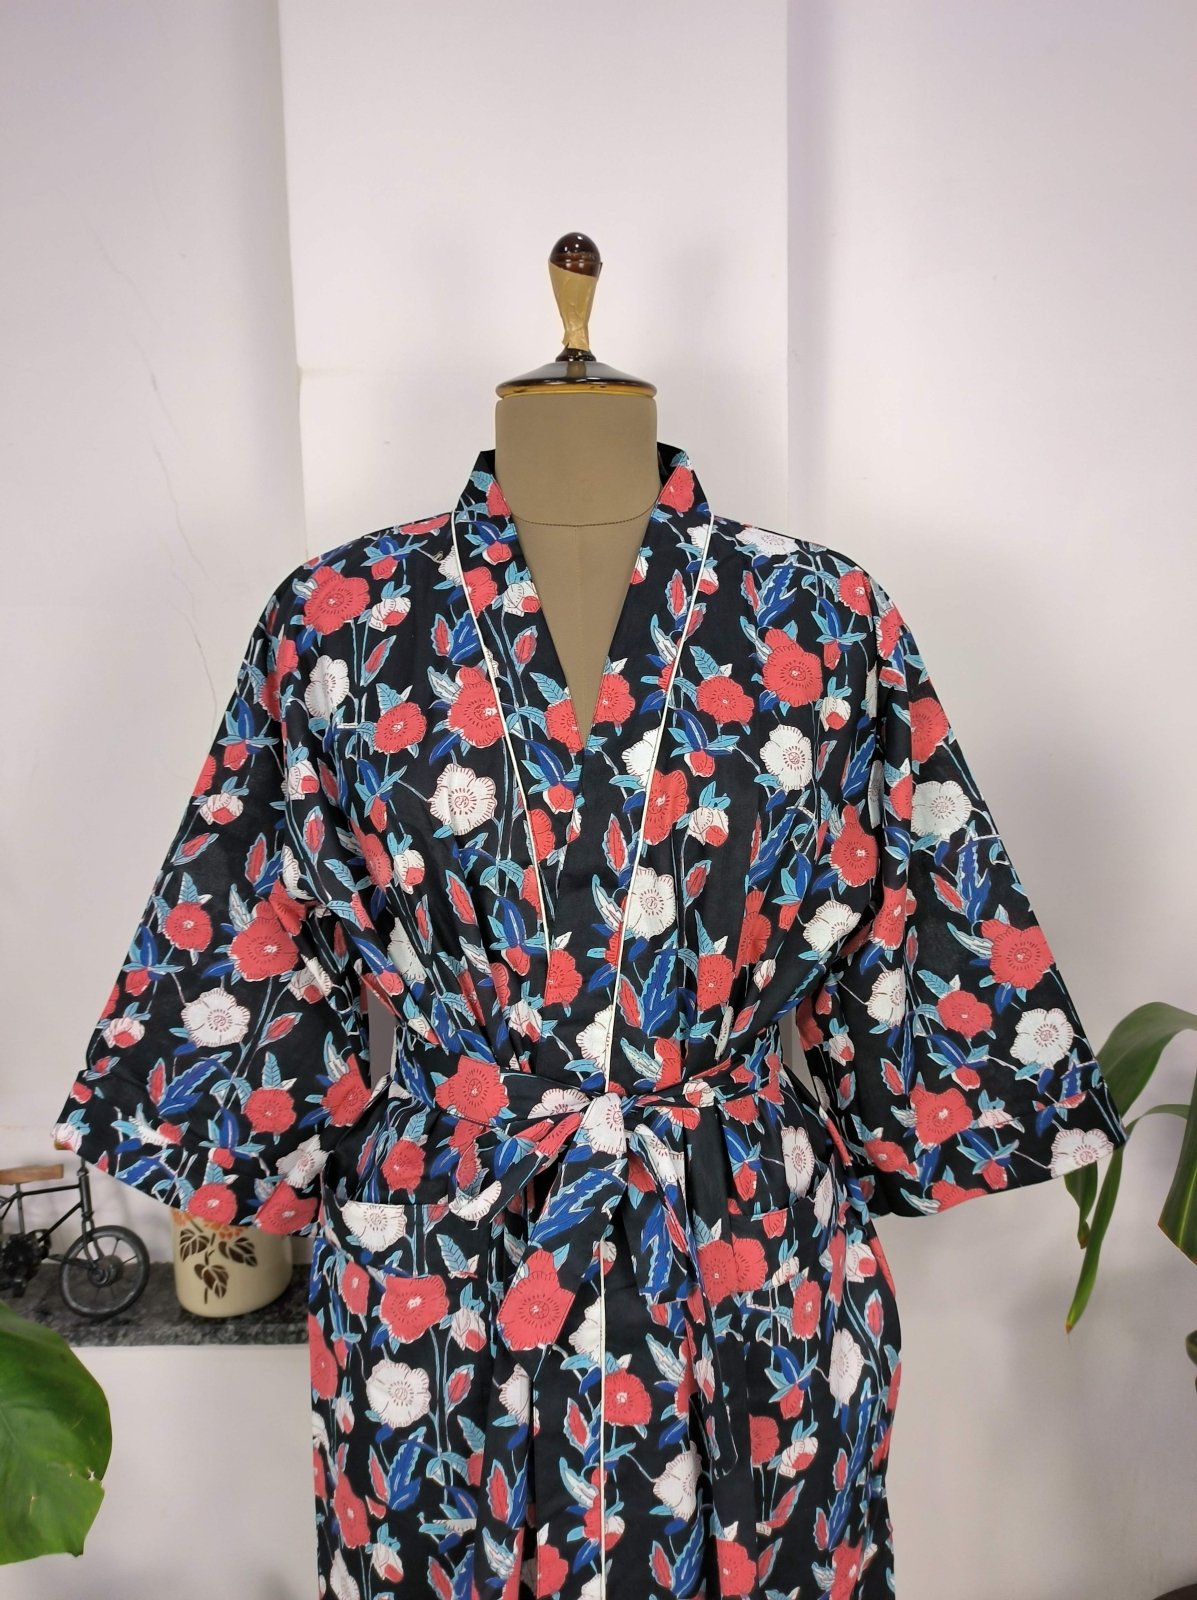 Boho House Robe Indian Handprinted Cotton Kimono Mid-Night Blossom | Perfect for Summer Luxury Beach Holidays Yacht Cover Up Stunning Dress - The Eastern Loom